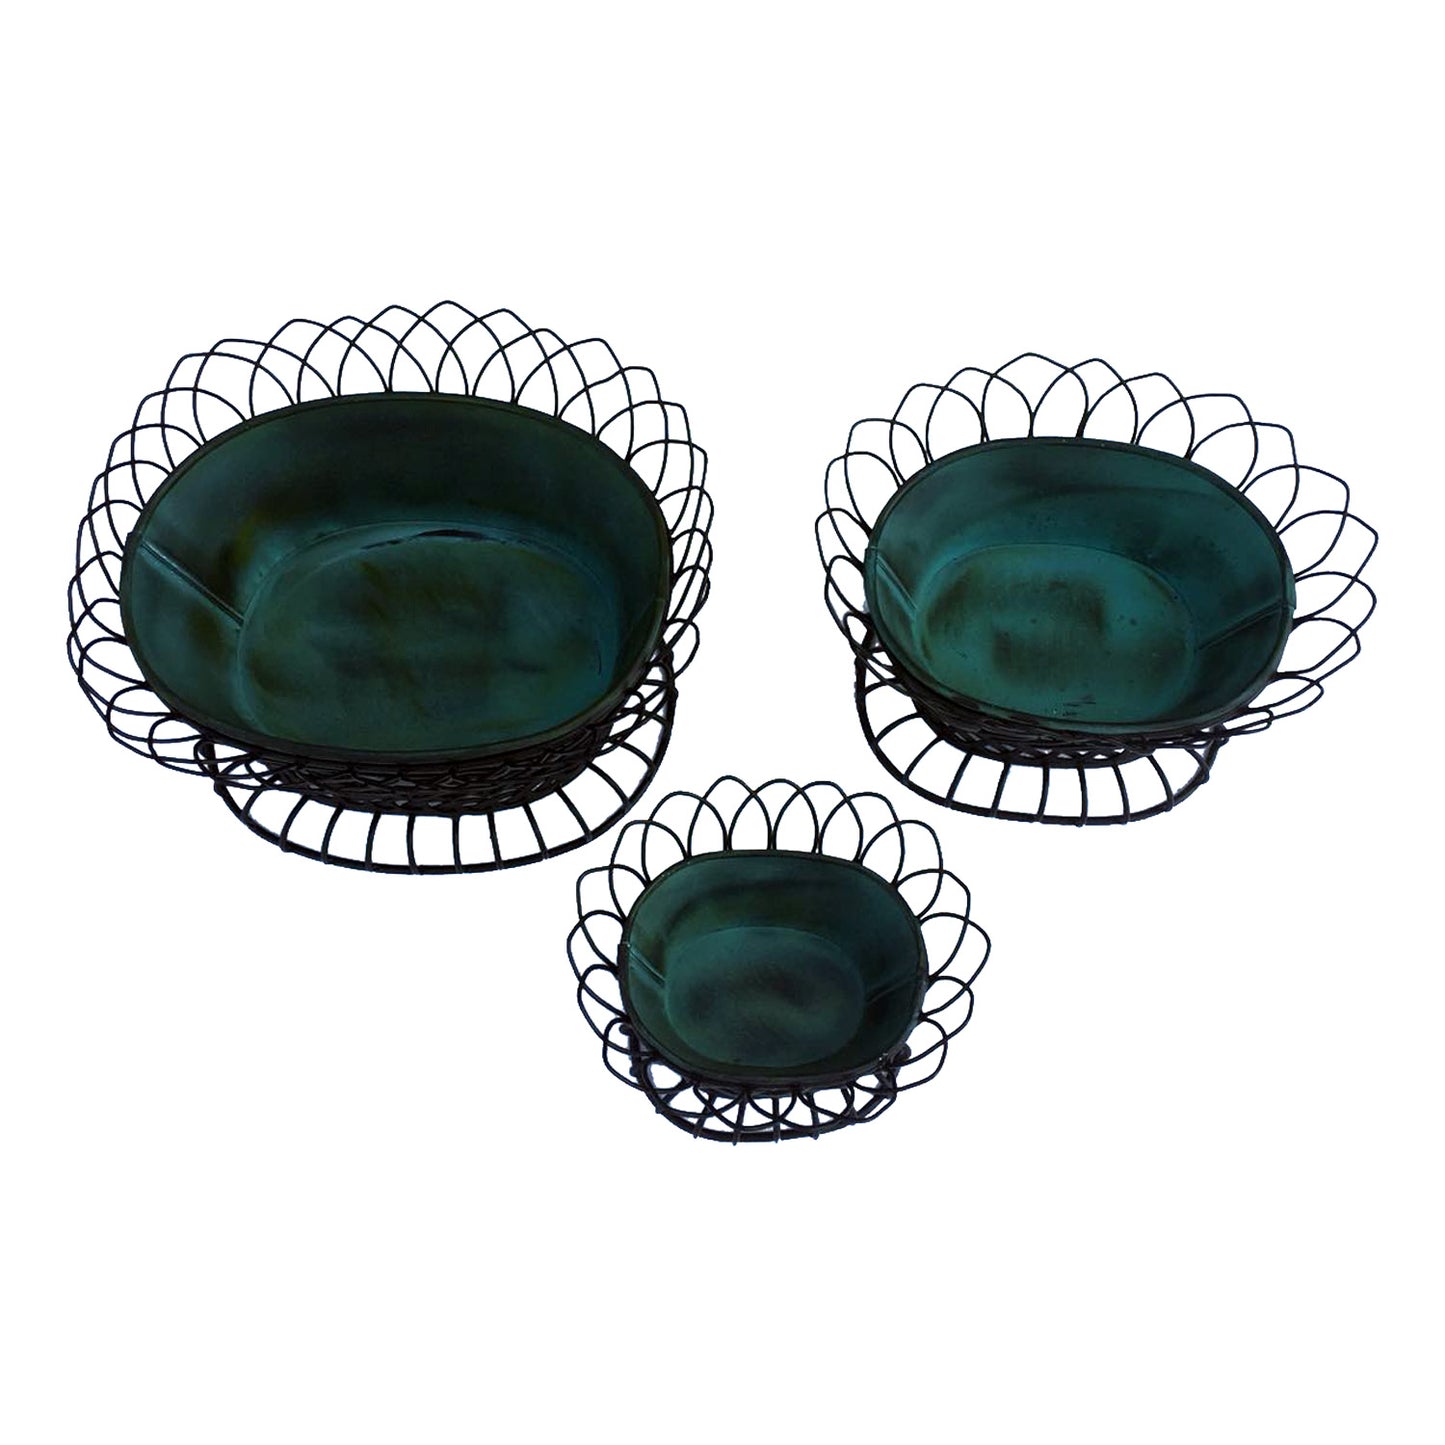 GiftBay 810-BG(S/3) Basket / Pot 3 Piece Set, Removable Pots in a Very Strong Wire Cage